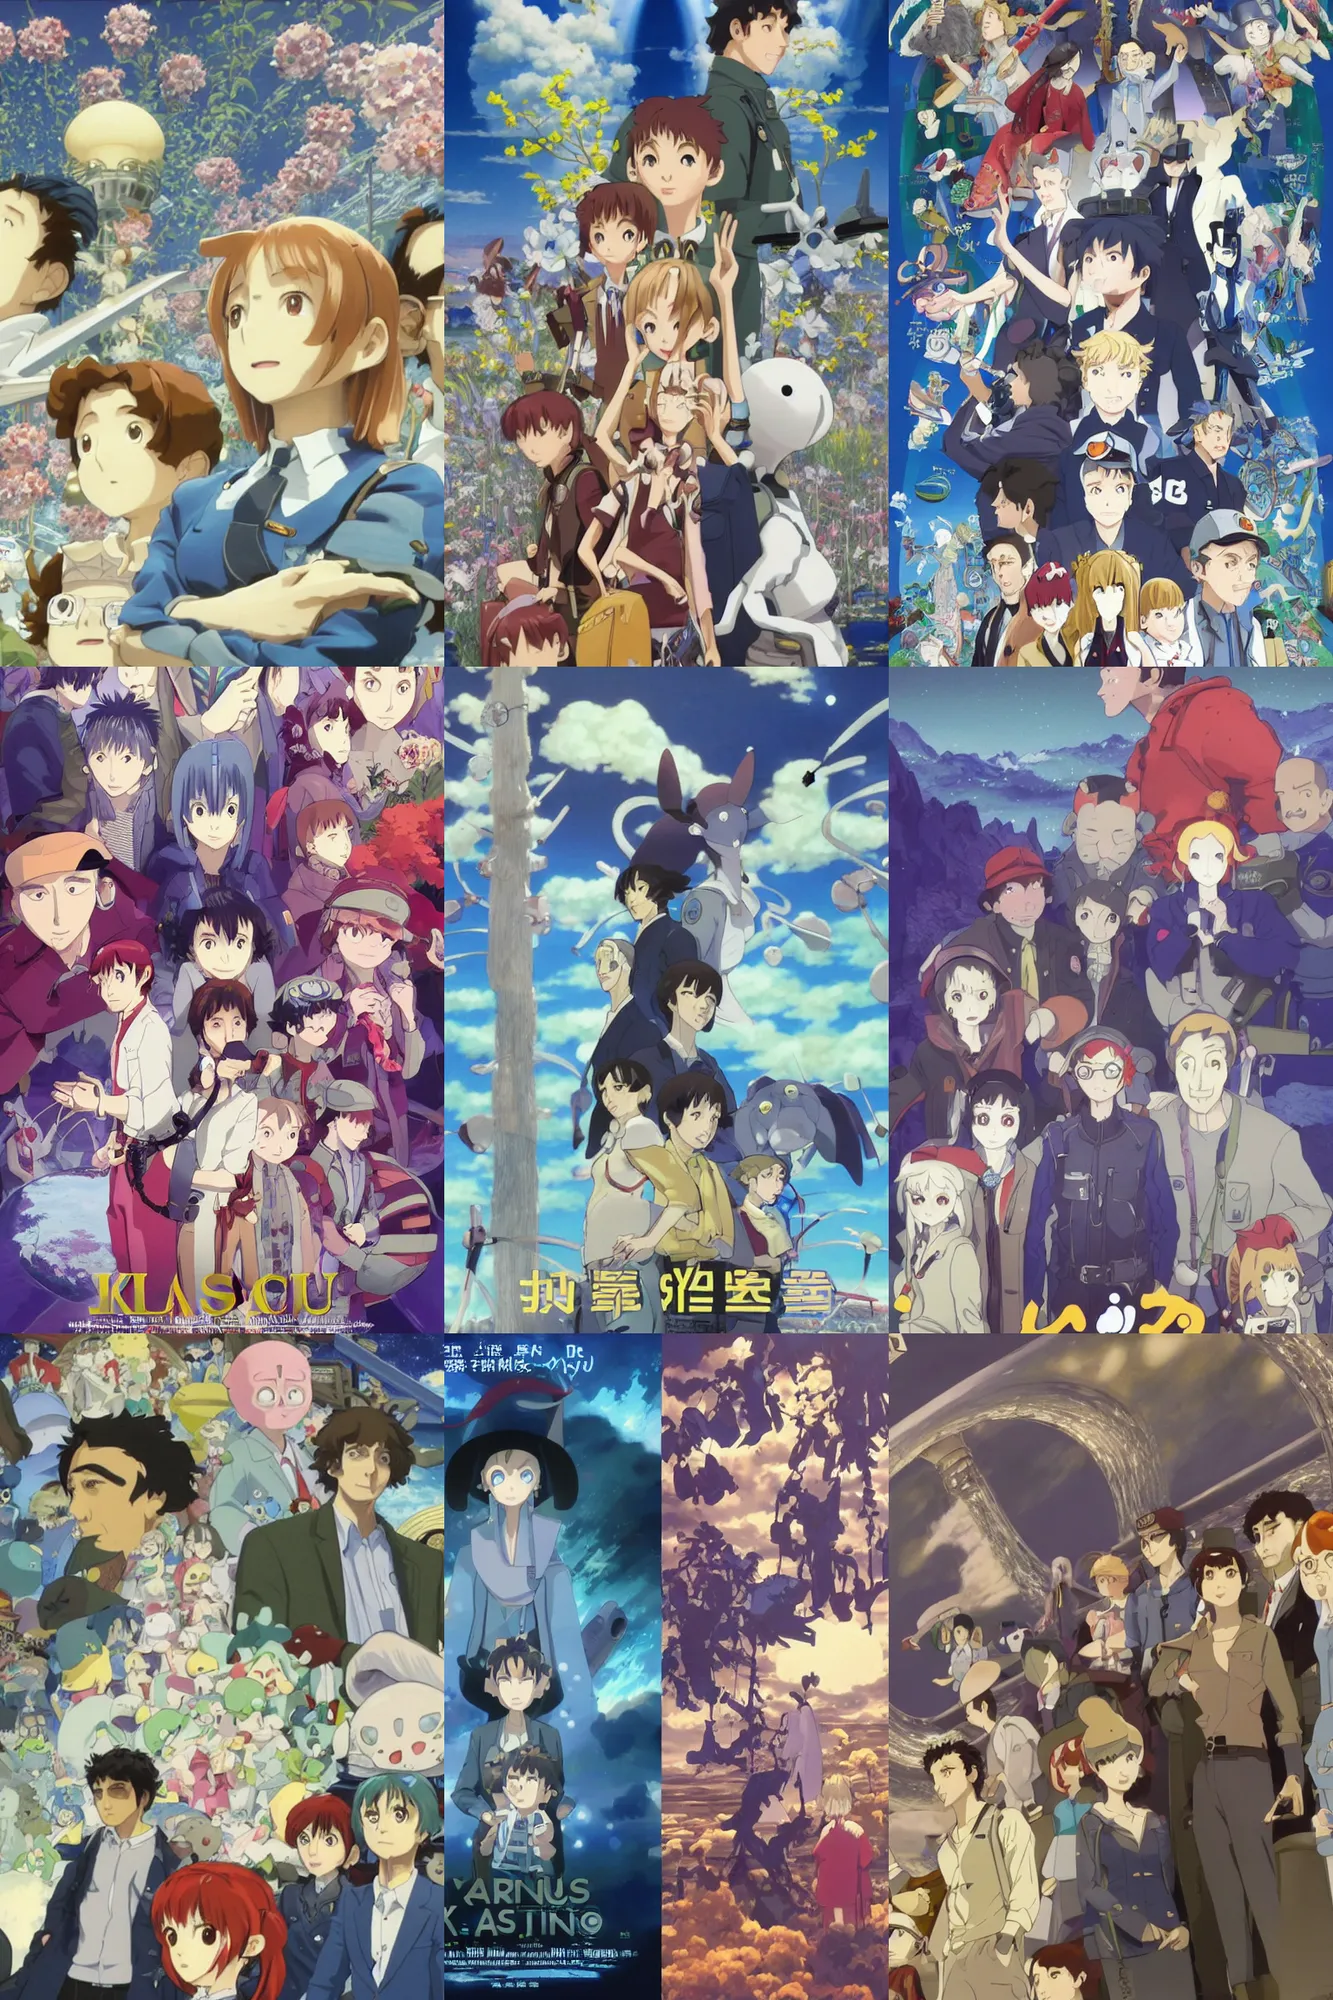 Prompt: at a airport baggage claim solving mysteries, Klaus Movie poster, artwork by Chiho Aoshima, Donato Giancola, Craig Mullins, a Rendering of a cinematic beautiful closeup moment of friends standing facing toward their love, full of details,by Mamoru Hosoda, a painting of the virtual world, digital game world, screenshot from the anime series Sword Art Online, makoto shinkai Matte painting, trending on artstation and unreal engine